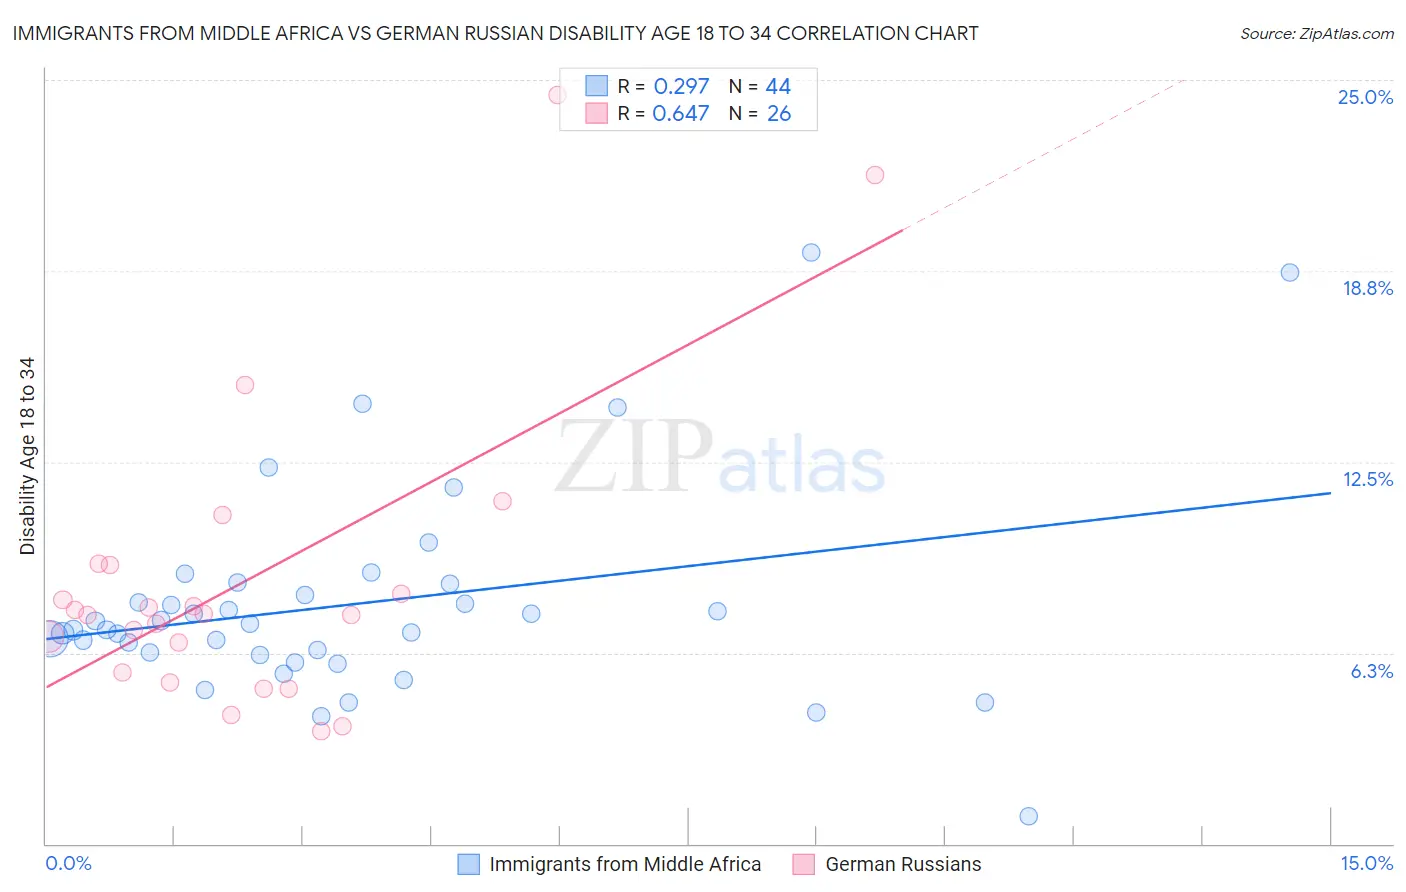 Immigrants from Middle Africa vs German Russian Disability Age 18 to 34